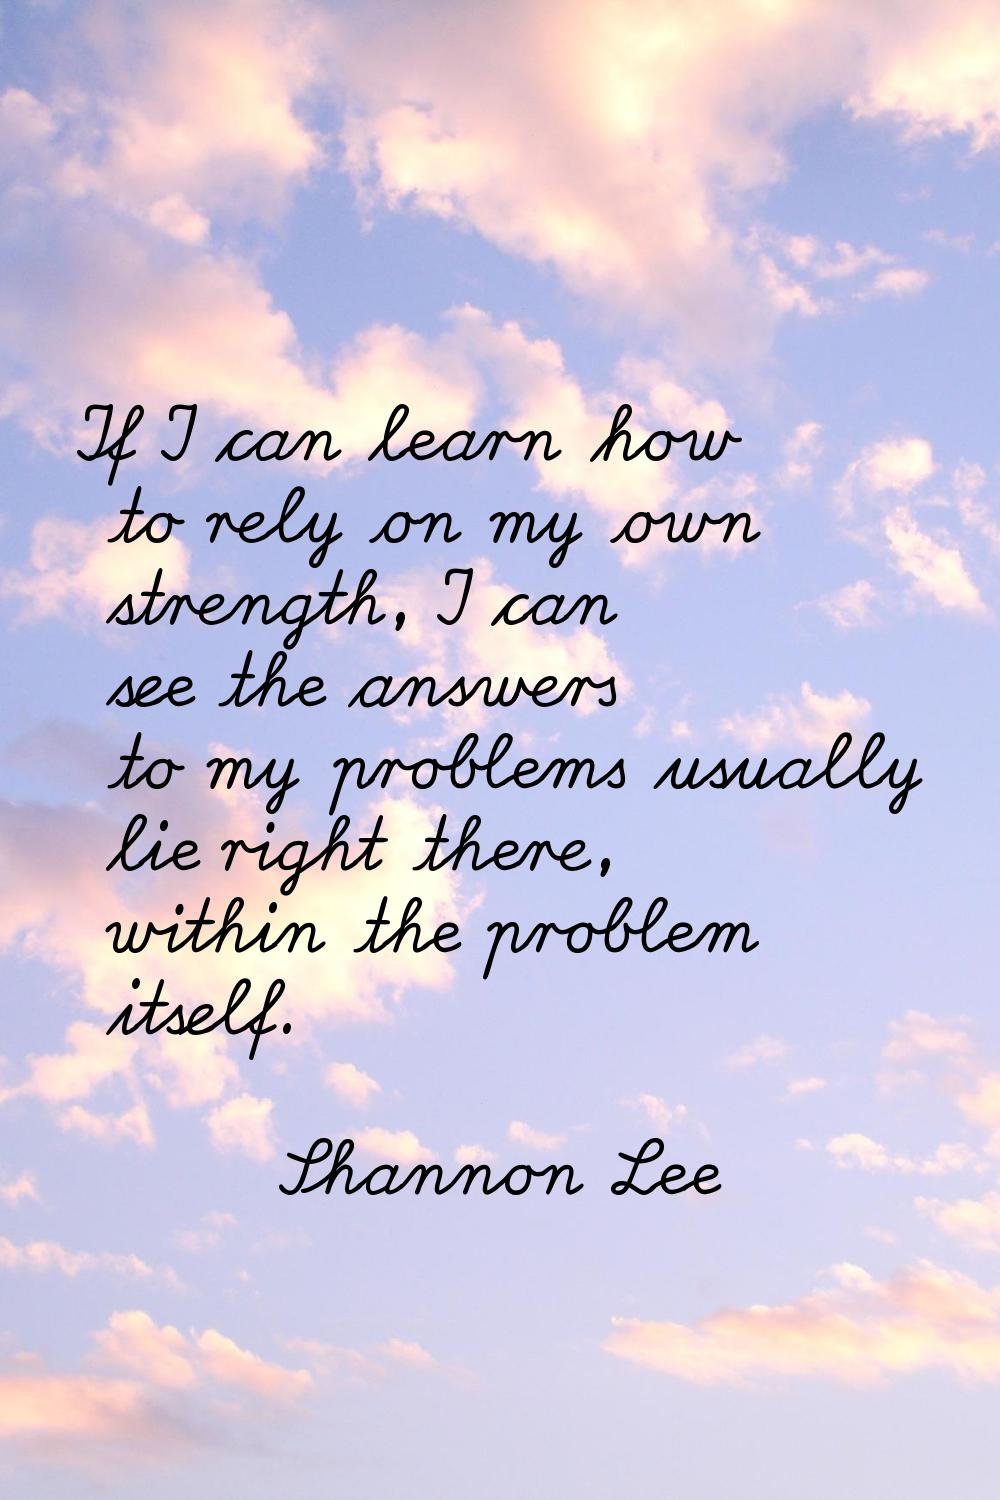 If I can learn how to rely on my own strength, I can see the answers to my problems usually lie rig